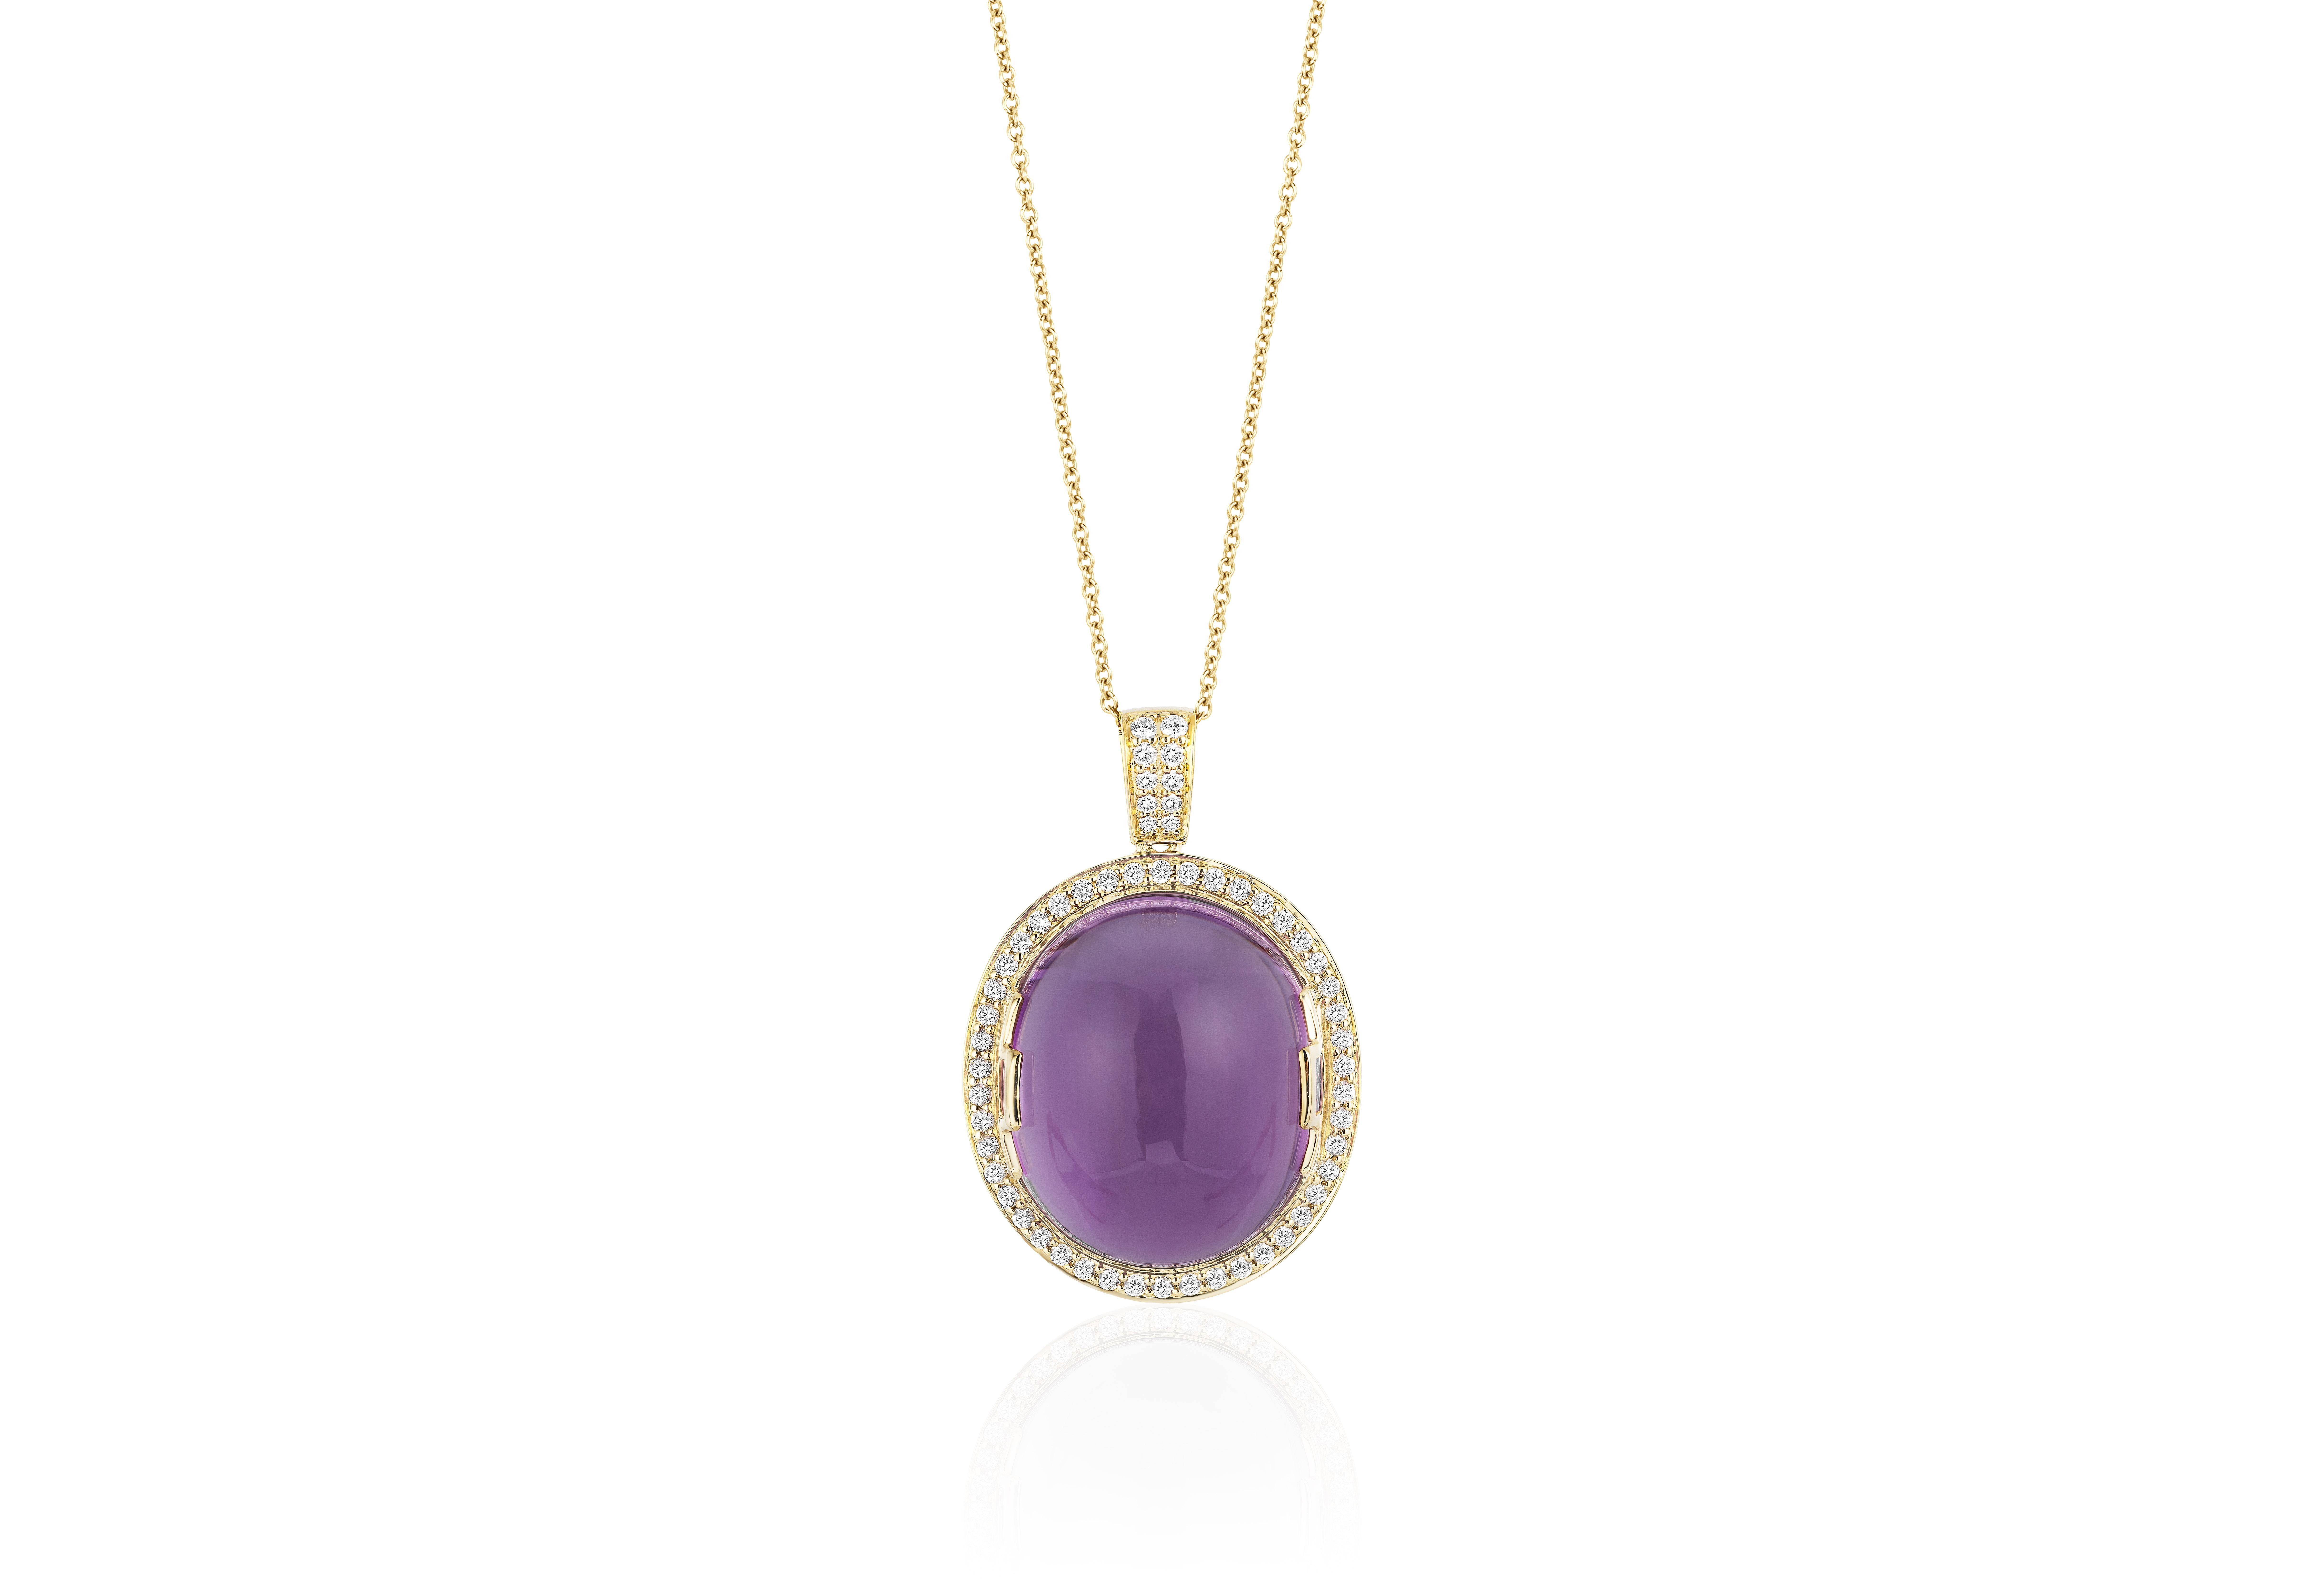 Amethyst Oval Cabochon Pendant in 18K Yellow Gold with Diamonds from 'Rock 'N Roll' Collection

 Stone Size: 20 x 17 mm

Gemstone Approx. Wt: Amethyst- 23.71 Carats

 Diamonds: G-H / VS, Approx Wt:0.47 Cts